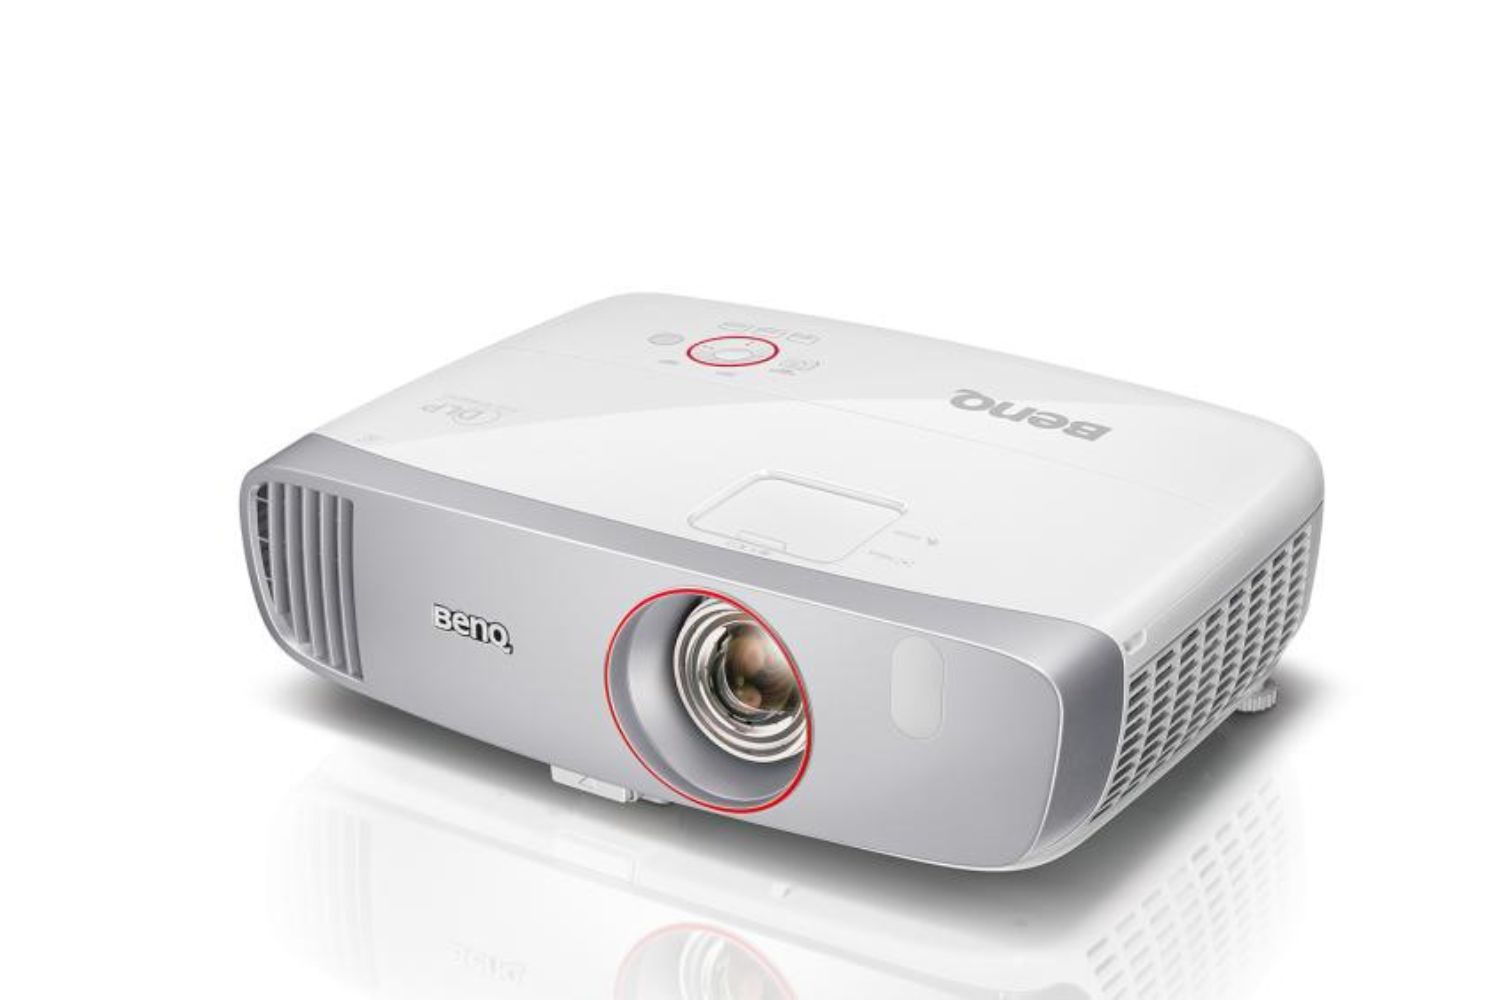 When Did The BenQ HT2150ST 1080P Home Theater Projector Short Throw Release